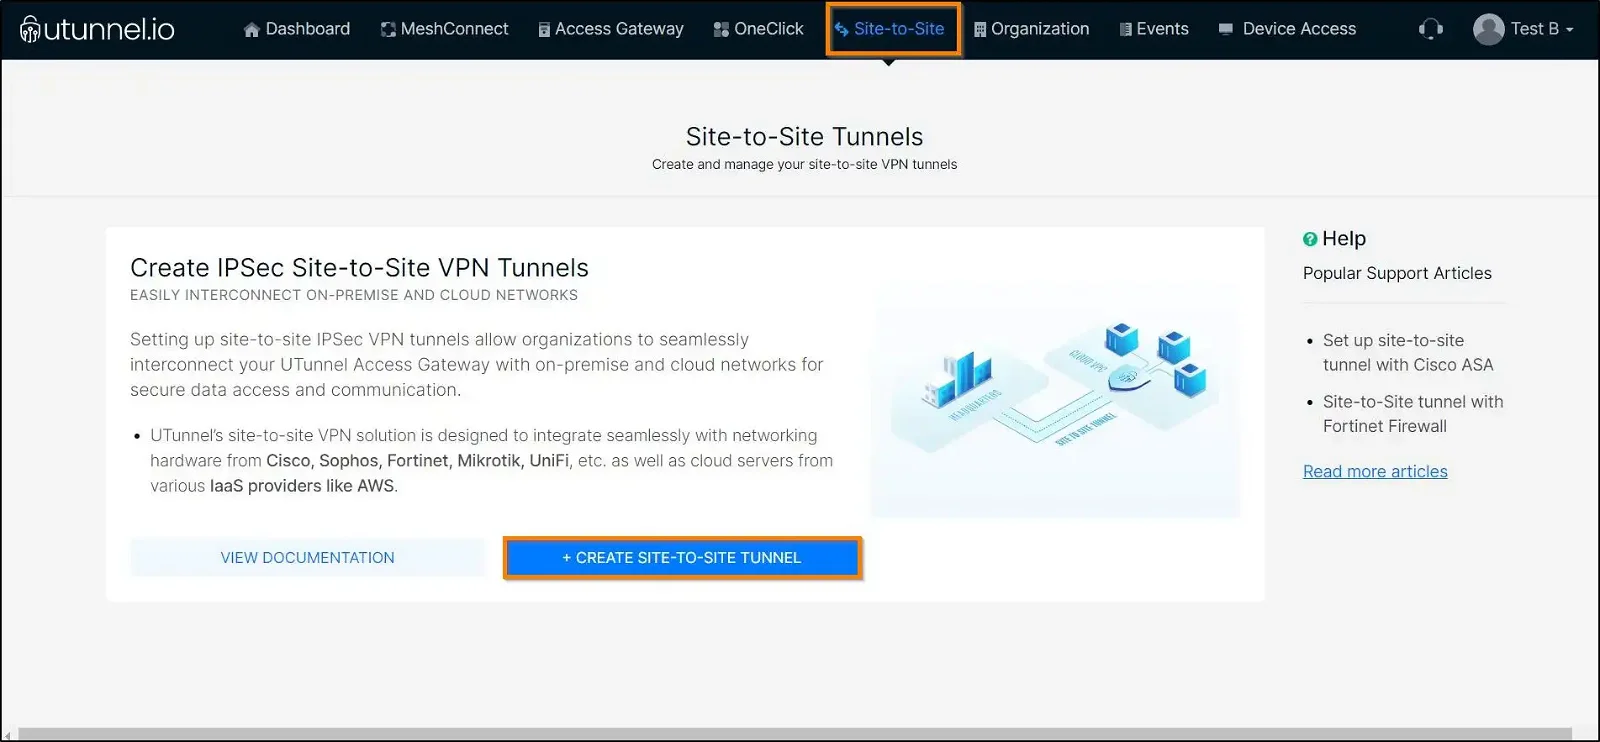 Site-to-Site tunnel with Fortinet Firewall create tunnel